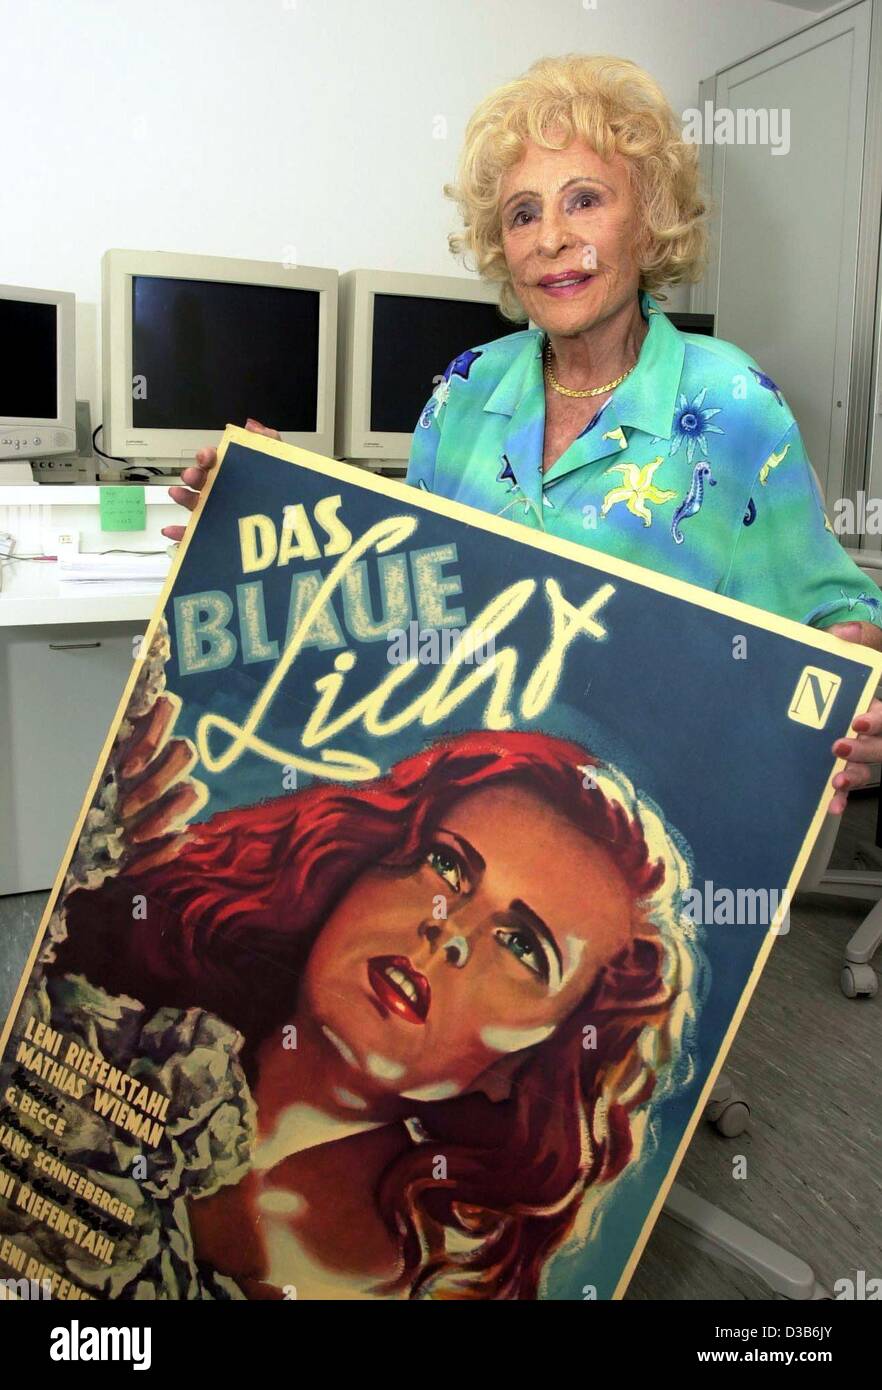 (dpa) - German filmmaker Leni Riefenstahl, presents the poster of her film 'The Blue Light' in her house in Poecking, Germany, 13 August 2002. The outstanding but controversial director and photographer who worked for Hitler and documented a huge nazi rally in her film 'Triumph of the Will' as well  Stock Photo